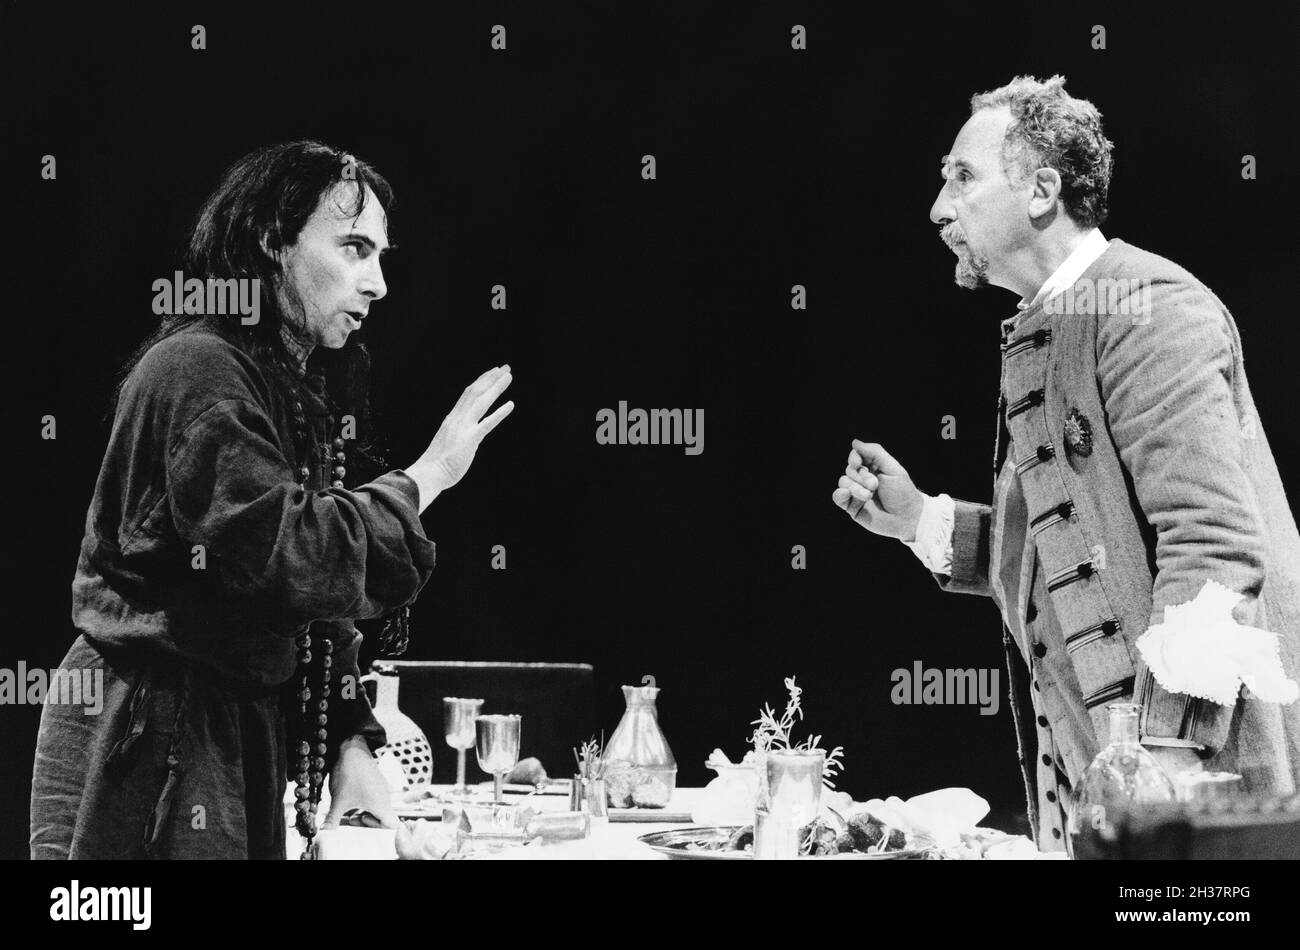 l-r: Antony Sher (Tartuffe), Nigel Hawthorne (Orgon) in TARTUFFE  by Moliere at the Royal Shakespeare Company (RSC), The Pit, Barbican Theatre, London EC2   28/07/1983  translated by Christopher Hampton  design: Alison Chitty  lighting: Leo Leibovici  director: Bill Alexander Stock Photo